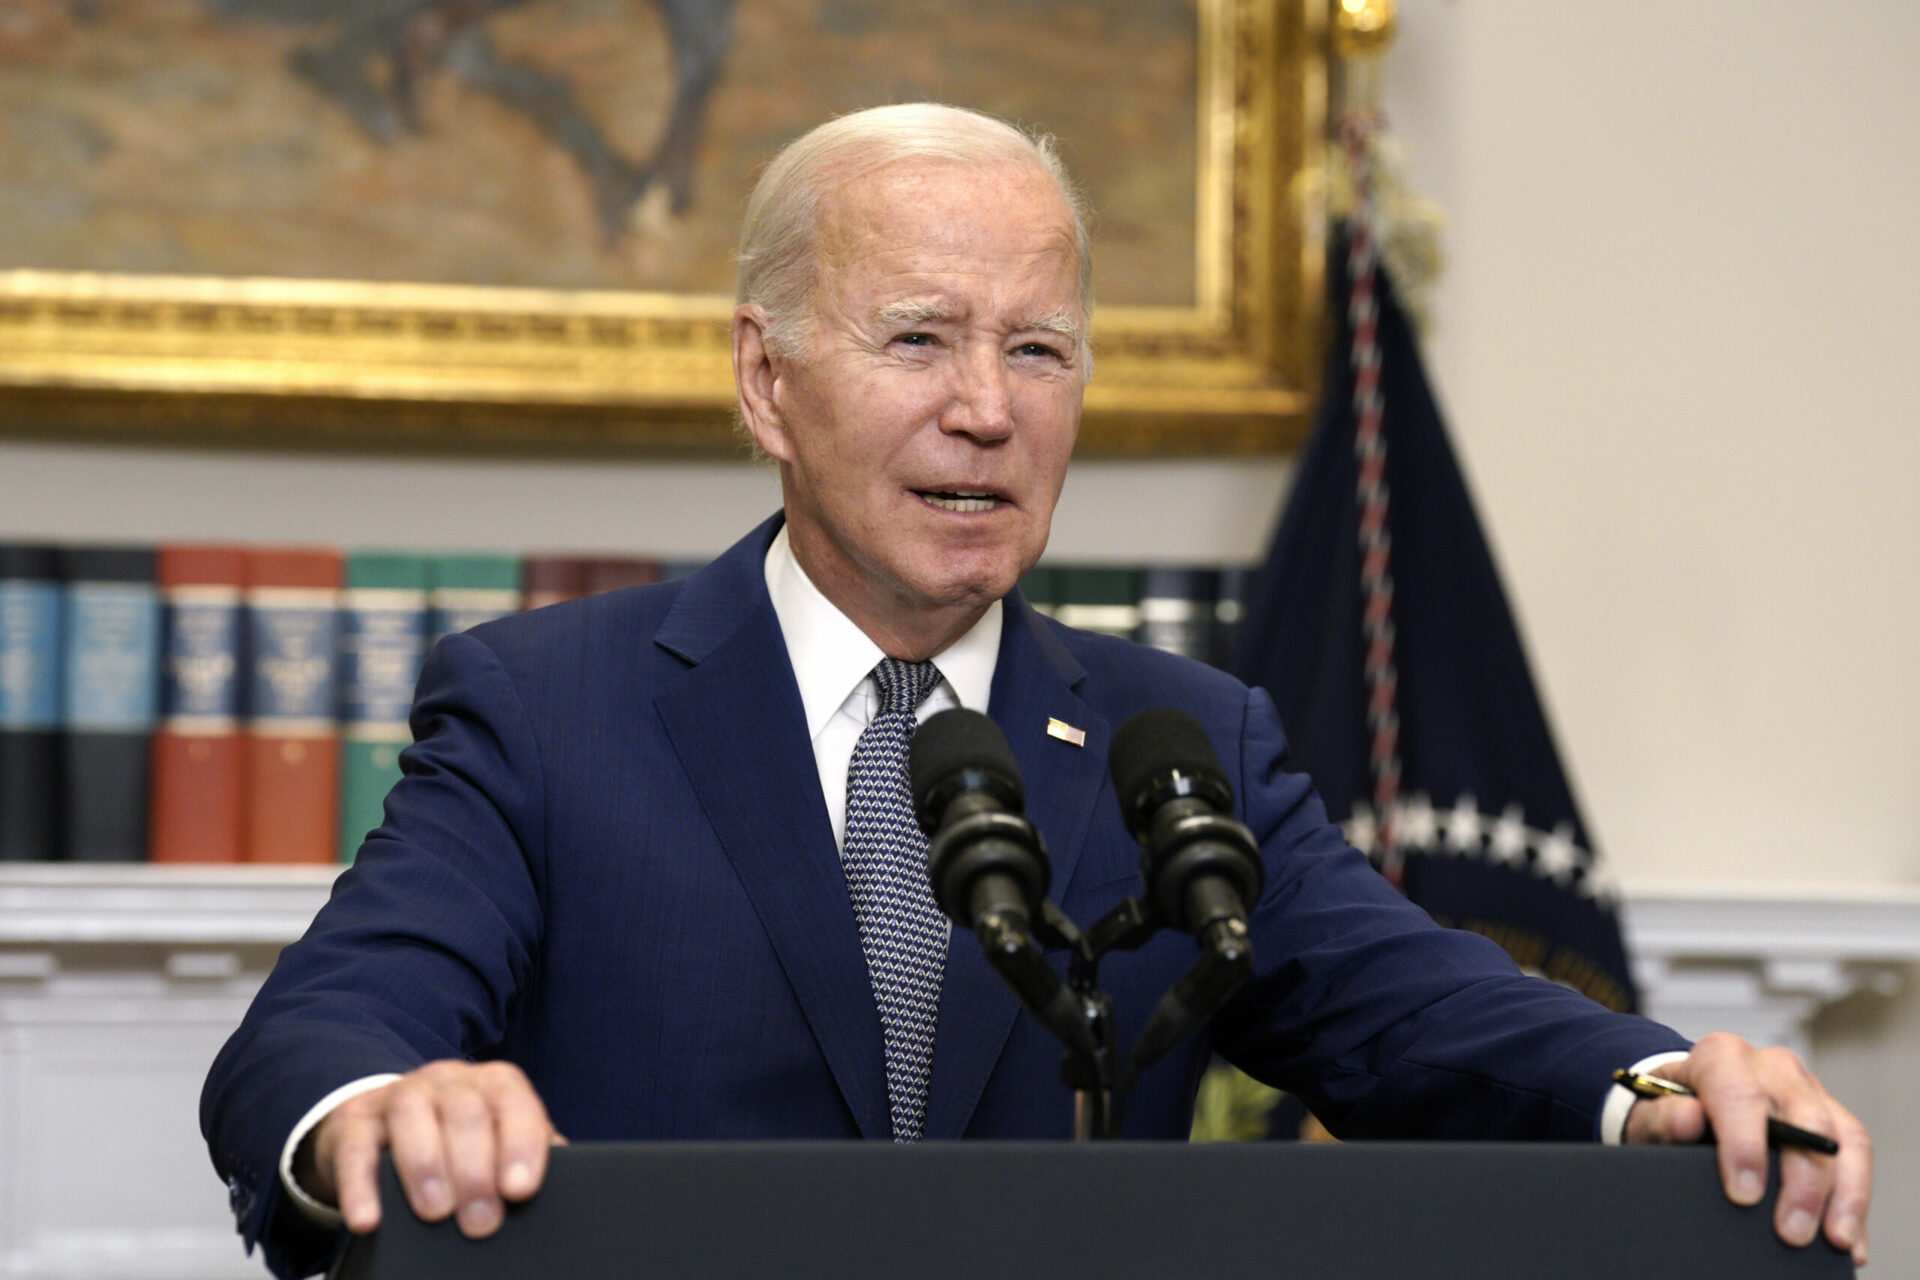 Biden planning 'amnesty' for millions of illegal immigrants